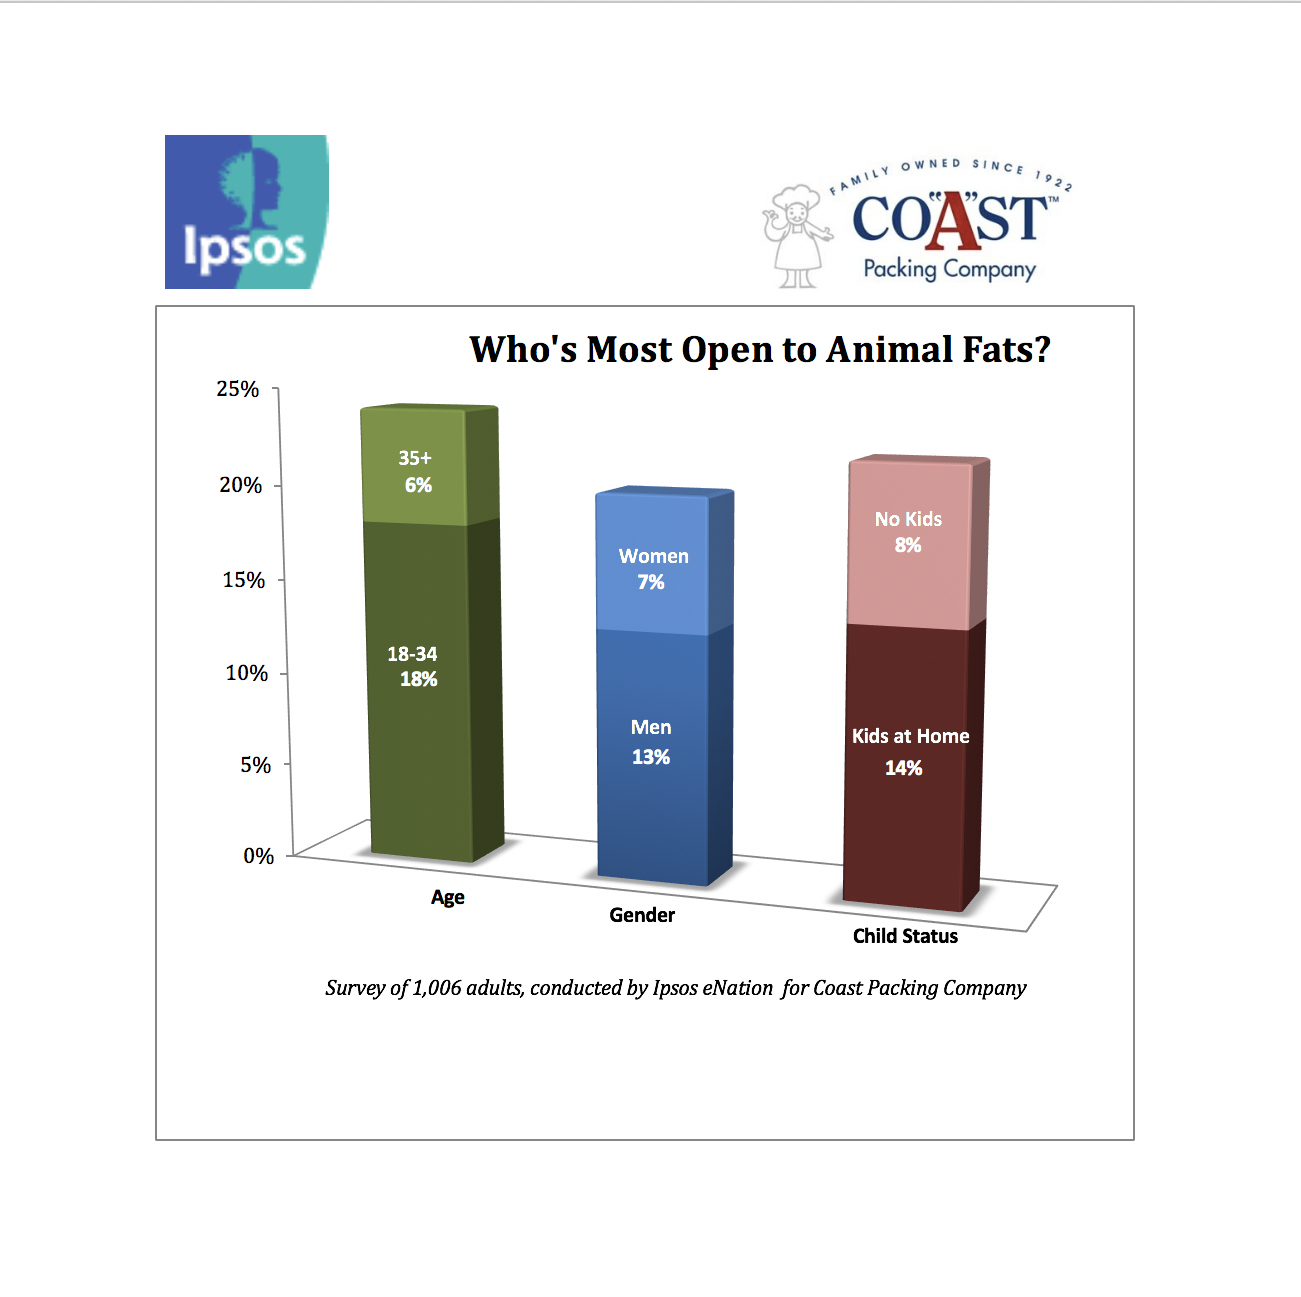 Youth, Gender Play Big Part in Openness to Healthy Animal Fats, Fourth Annual Coast Packing/Ipsos Survey Reveals